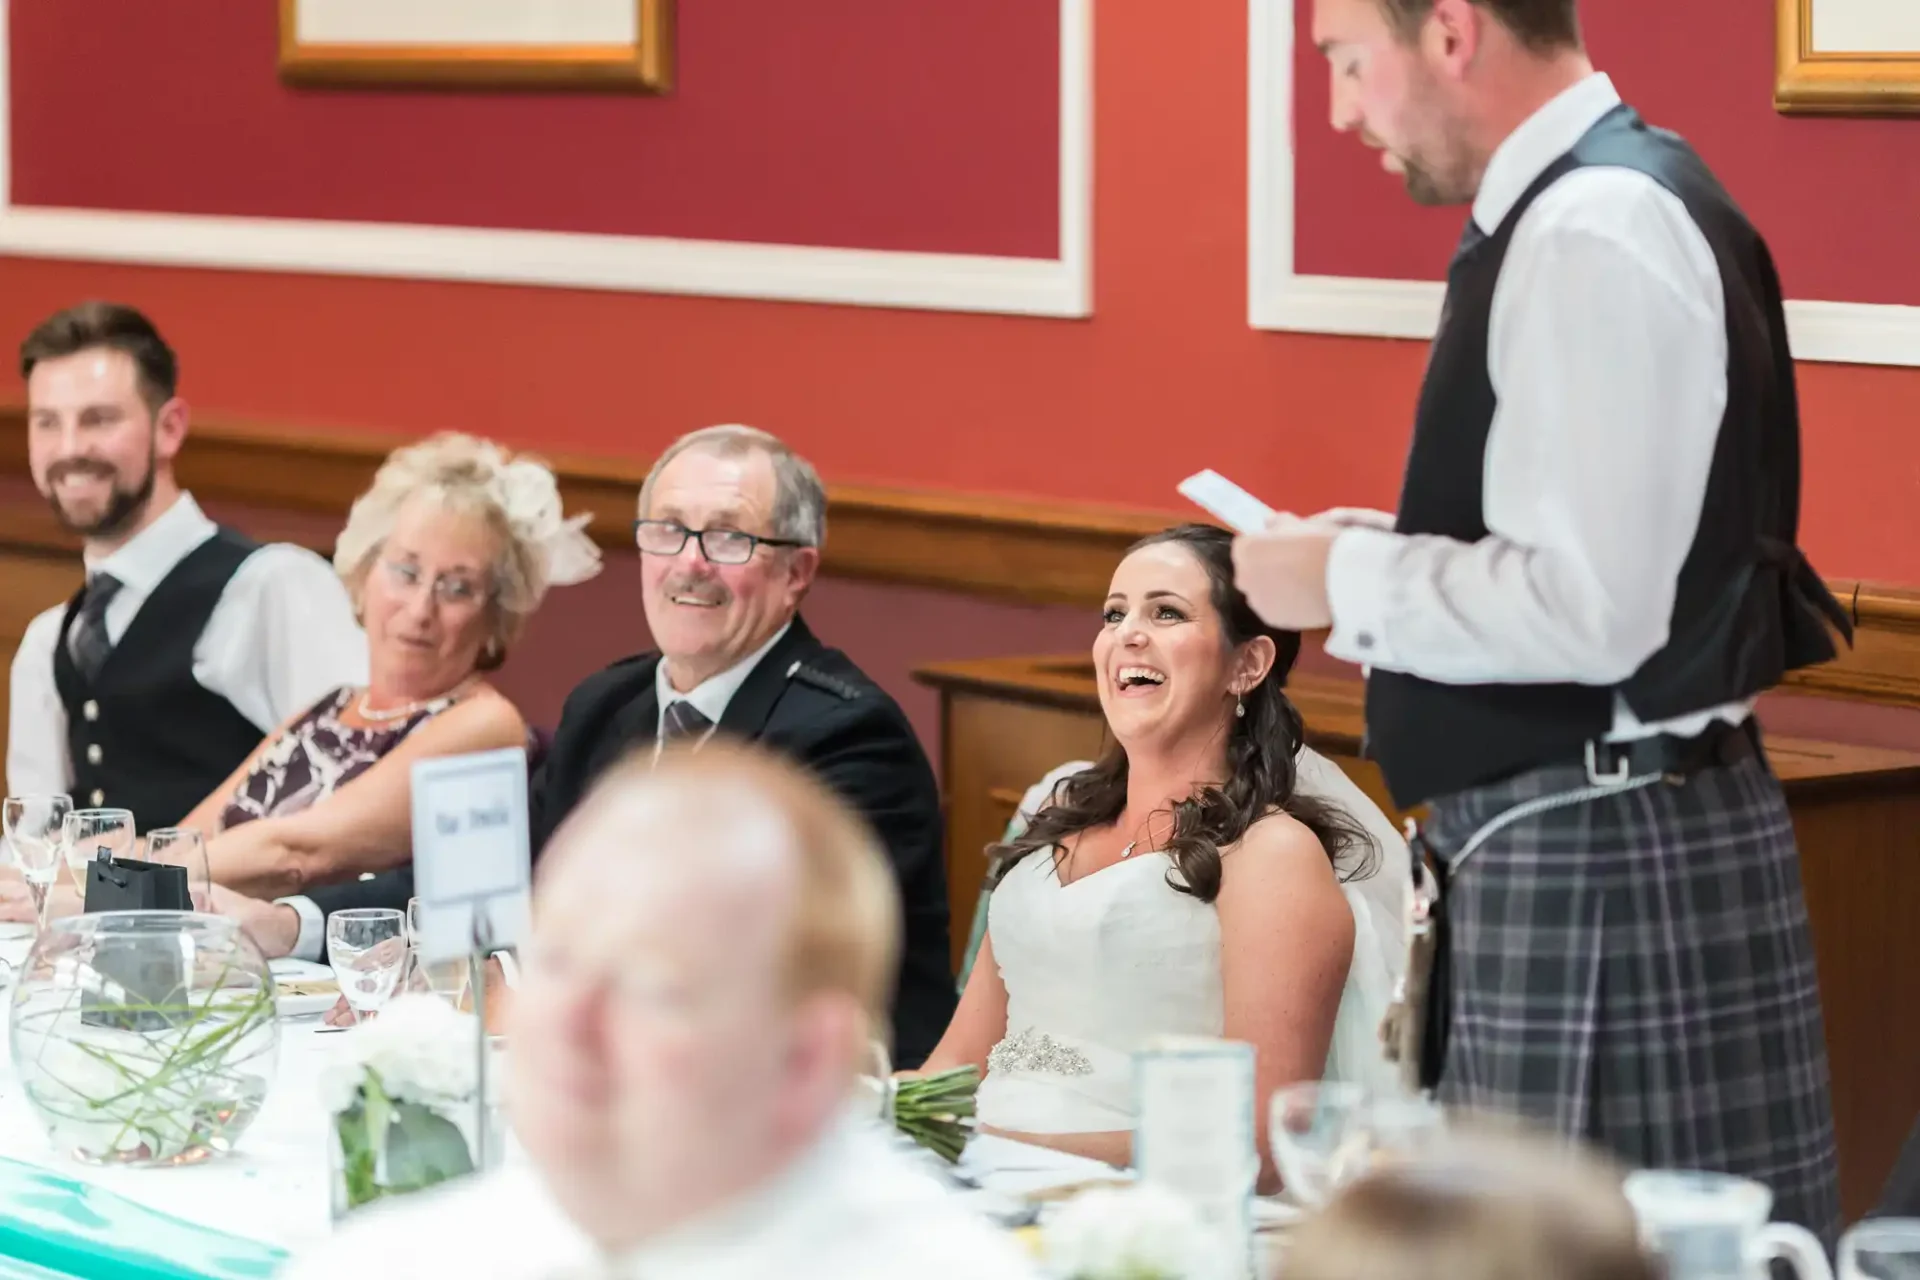 A bride laughs joyfully at a wedding reception table alongside guests listening to a standing man speaking, who wears a kilt.